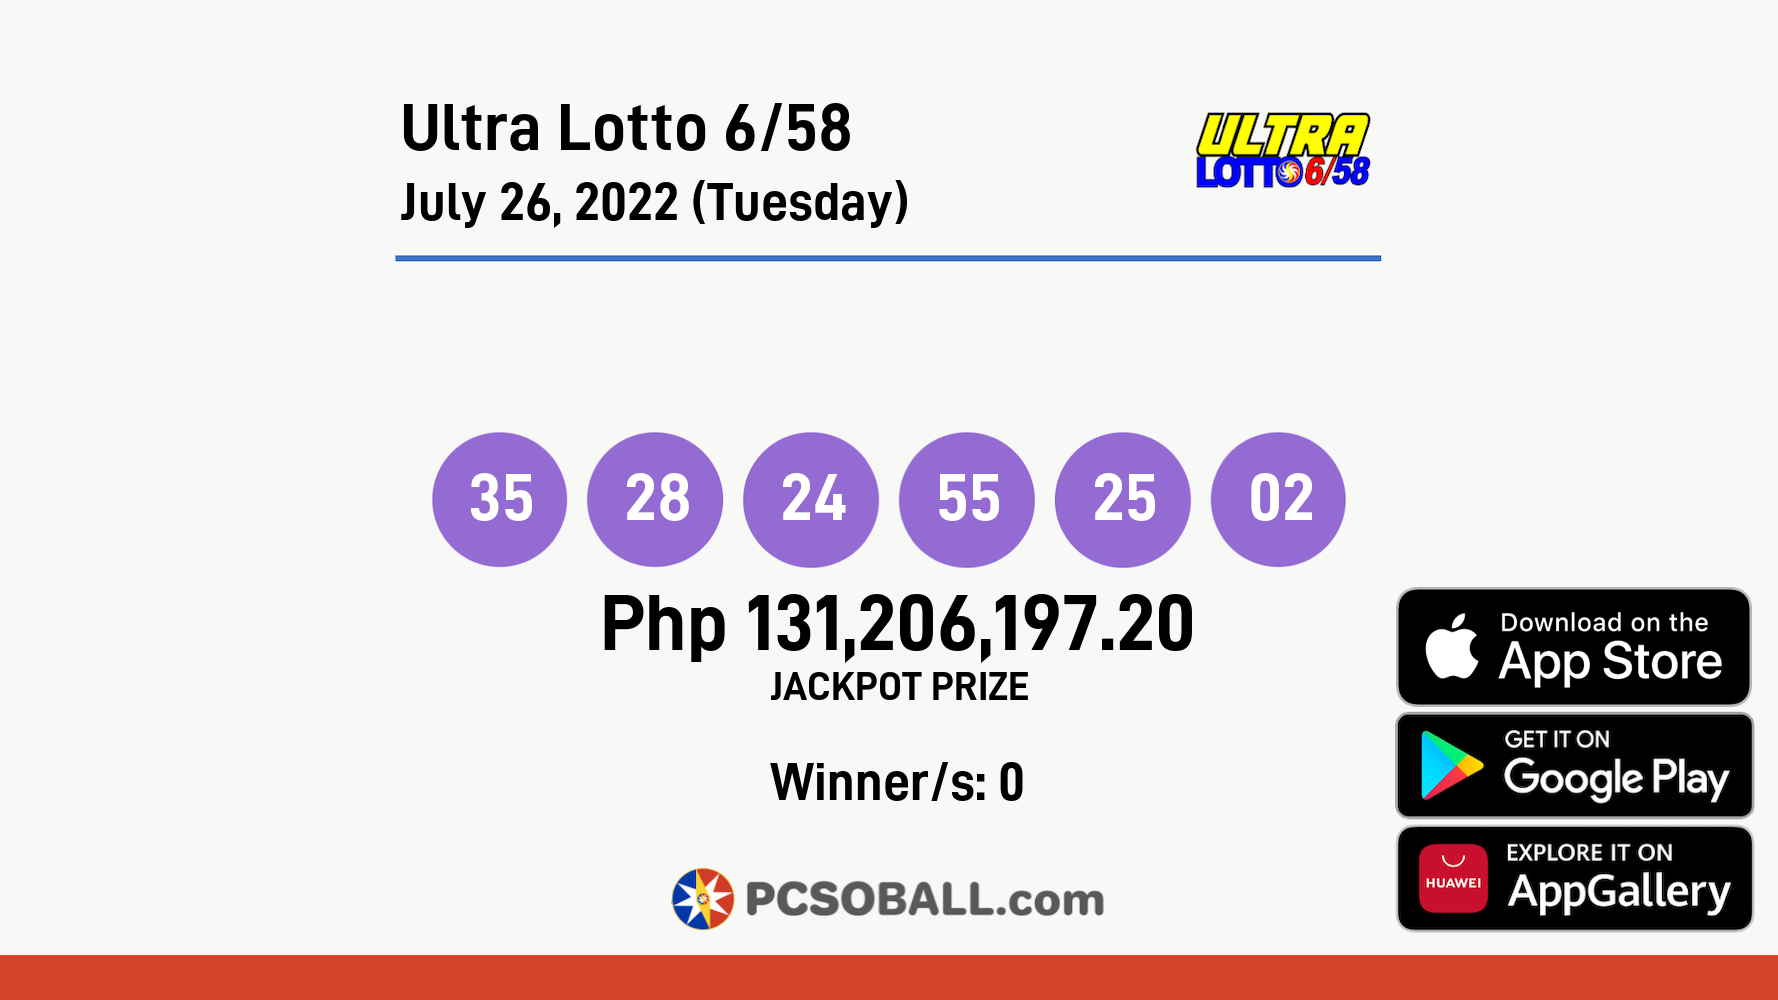 Ultra Lotto 6/58 July 26, 2022 (Tuesday) Result